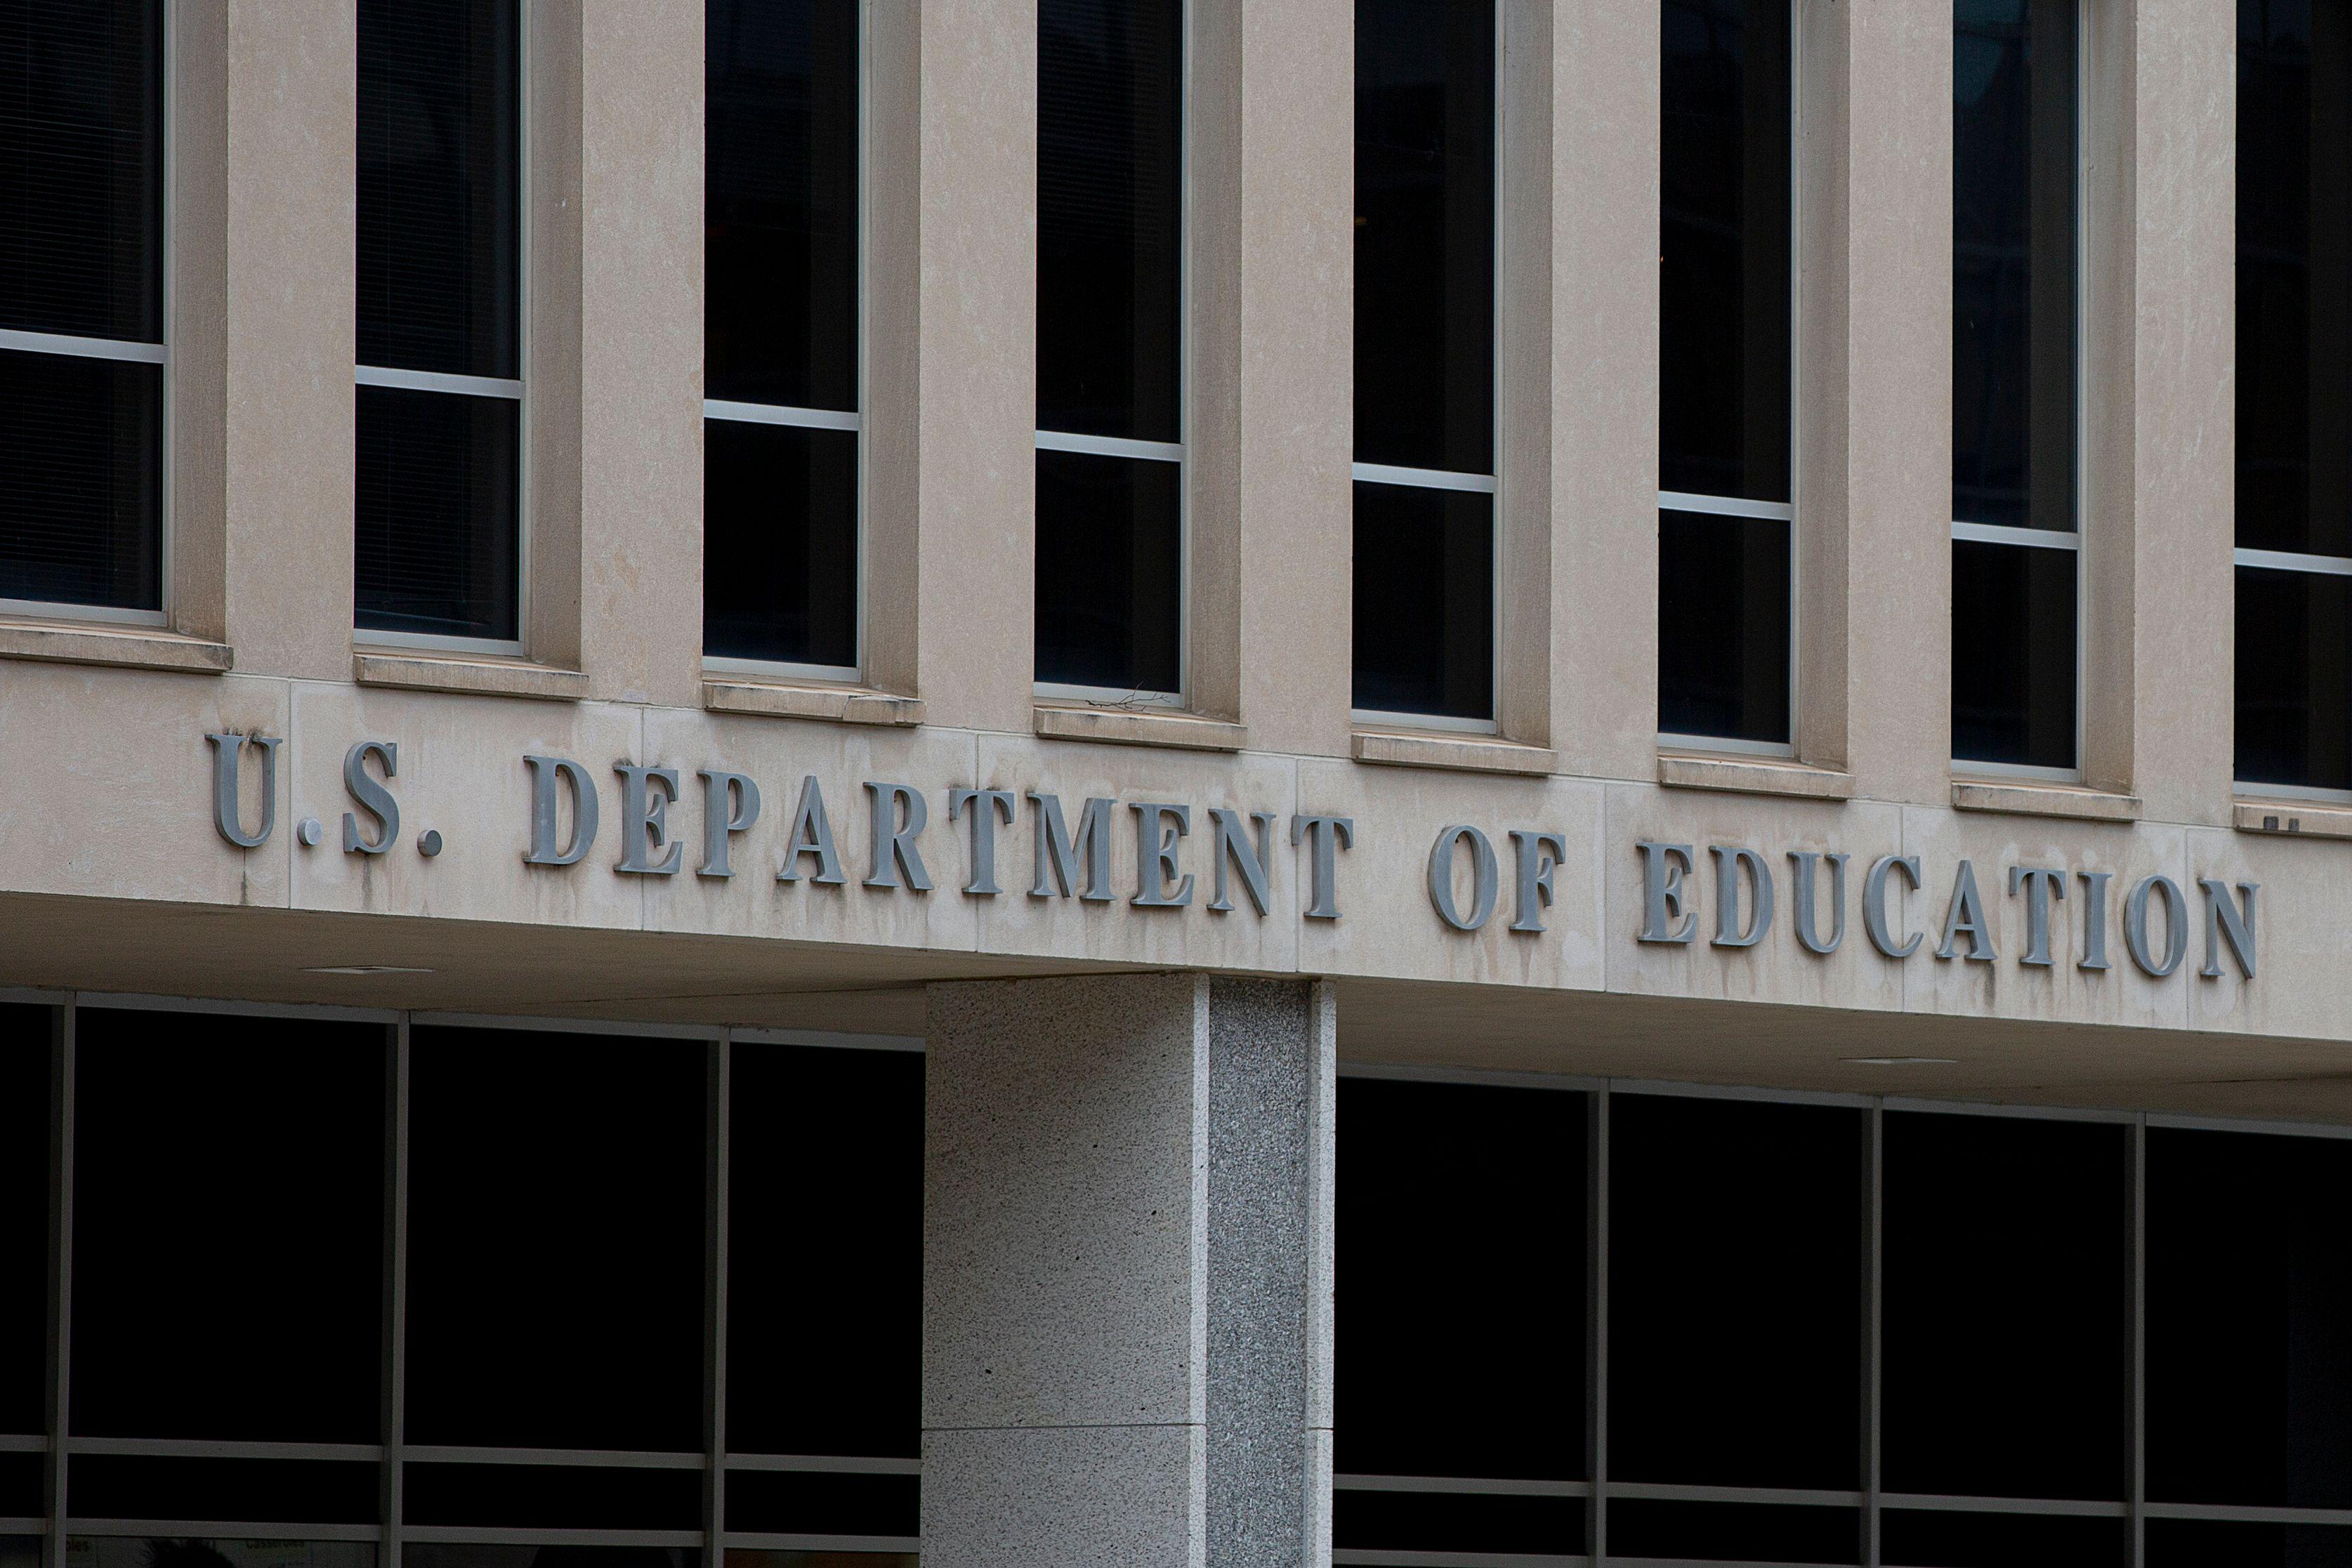 The US Department of Education building building is seen in Washington, DC, on July 22, 2019. (Photo by Alastair Pike / AFP)        (Photo credit should read ALASTAIR PIKE/AFP via Getty Images)